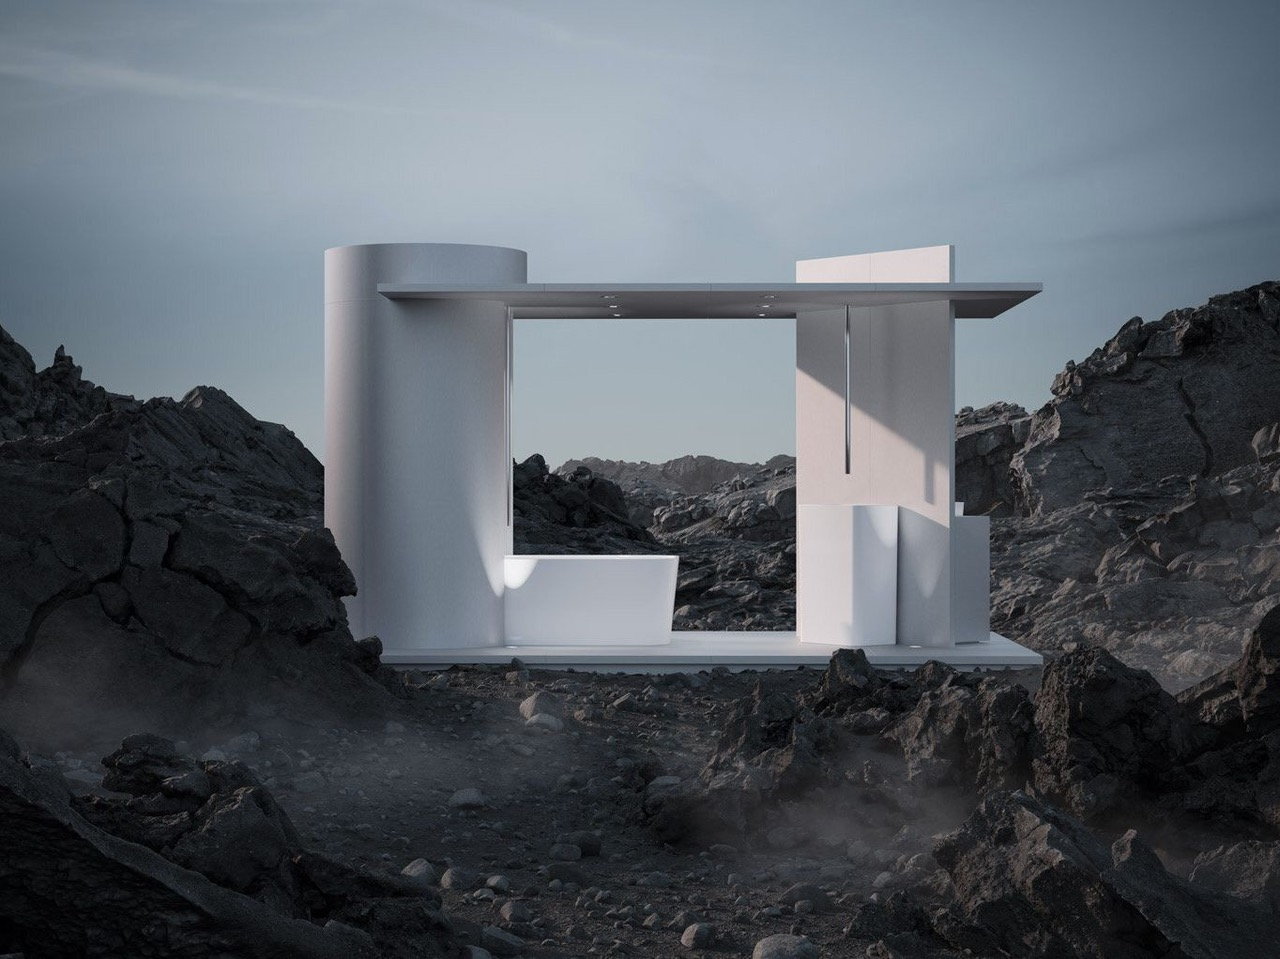 Bette-designed bathroom envisioned on an alien world called 